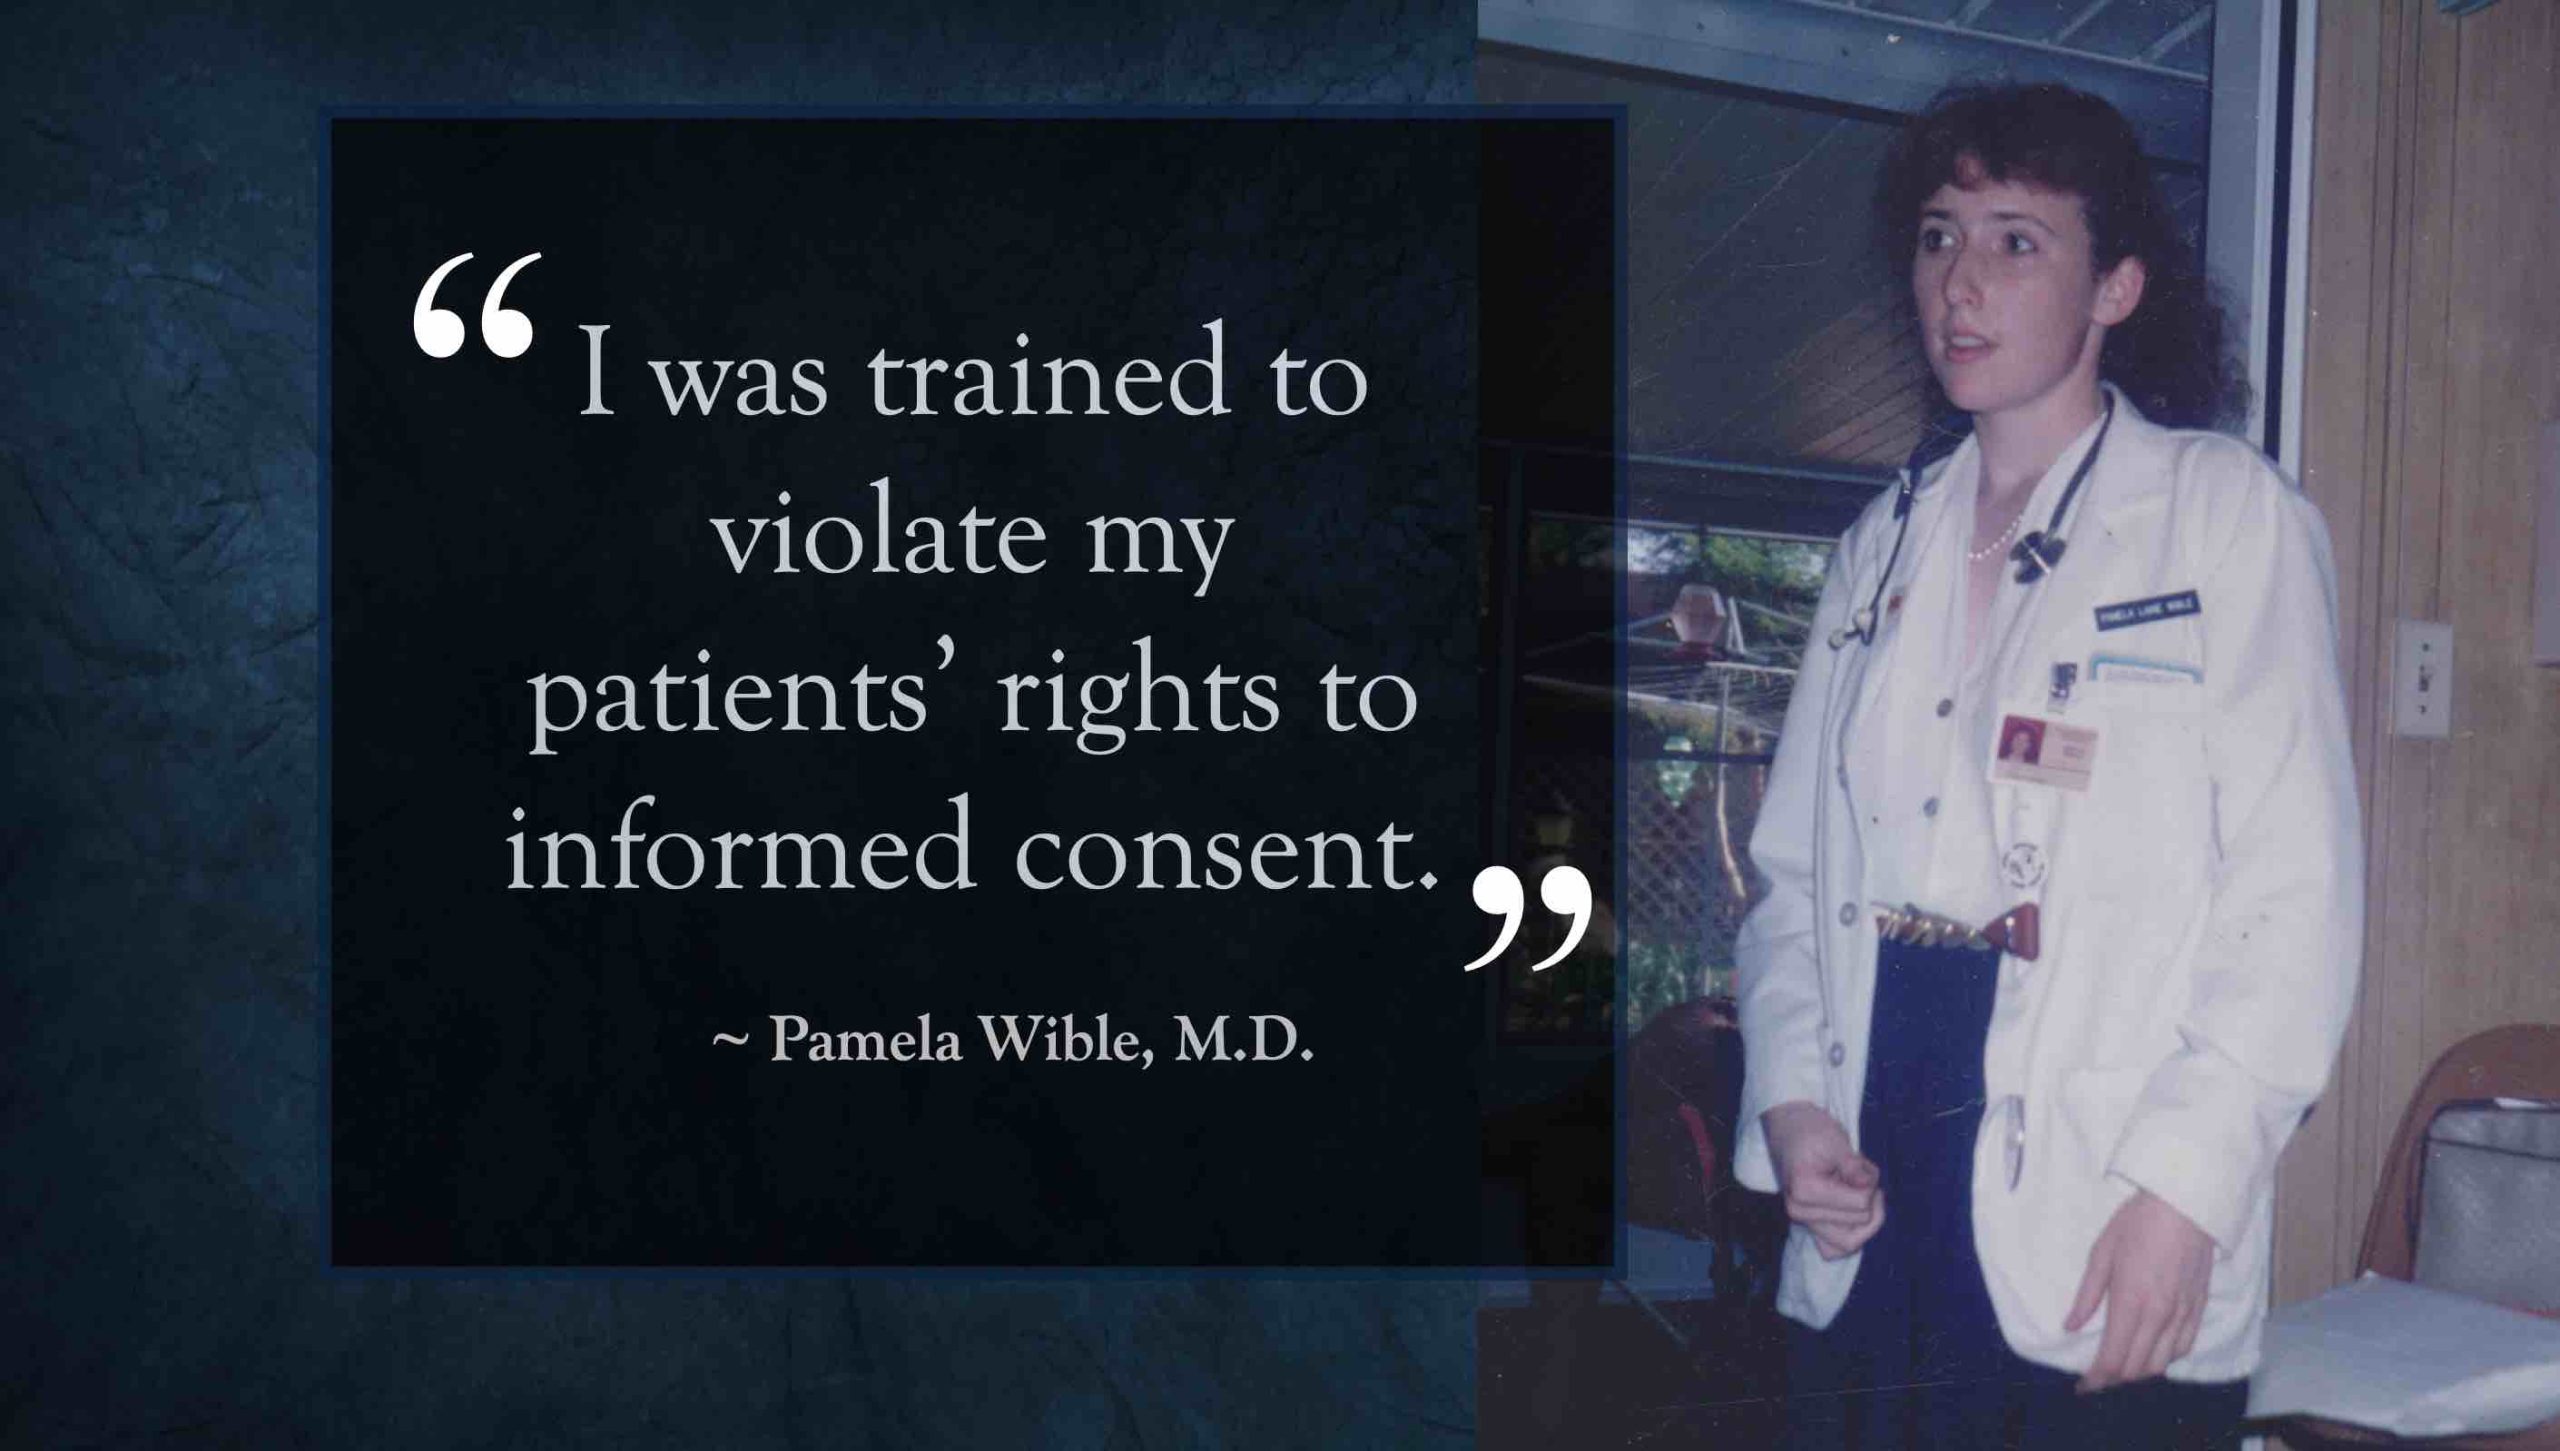 As a doctor, I was trained to violate my patients rights to informed consent photo